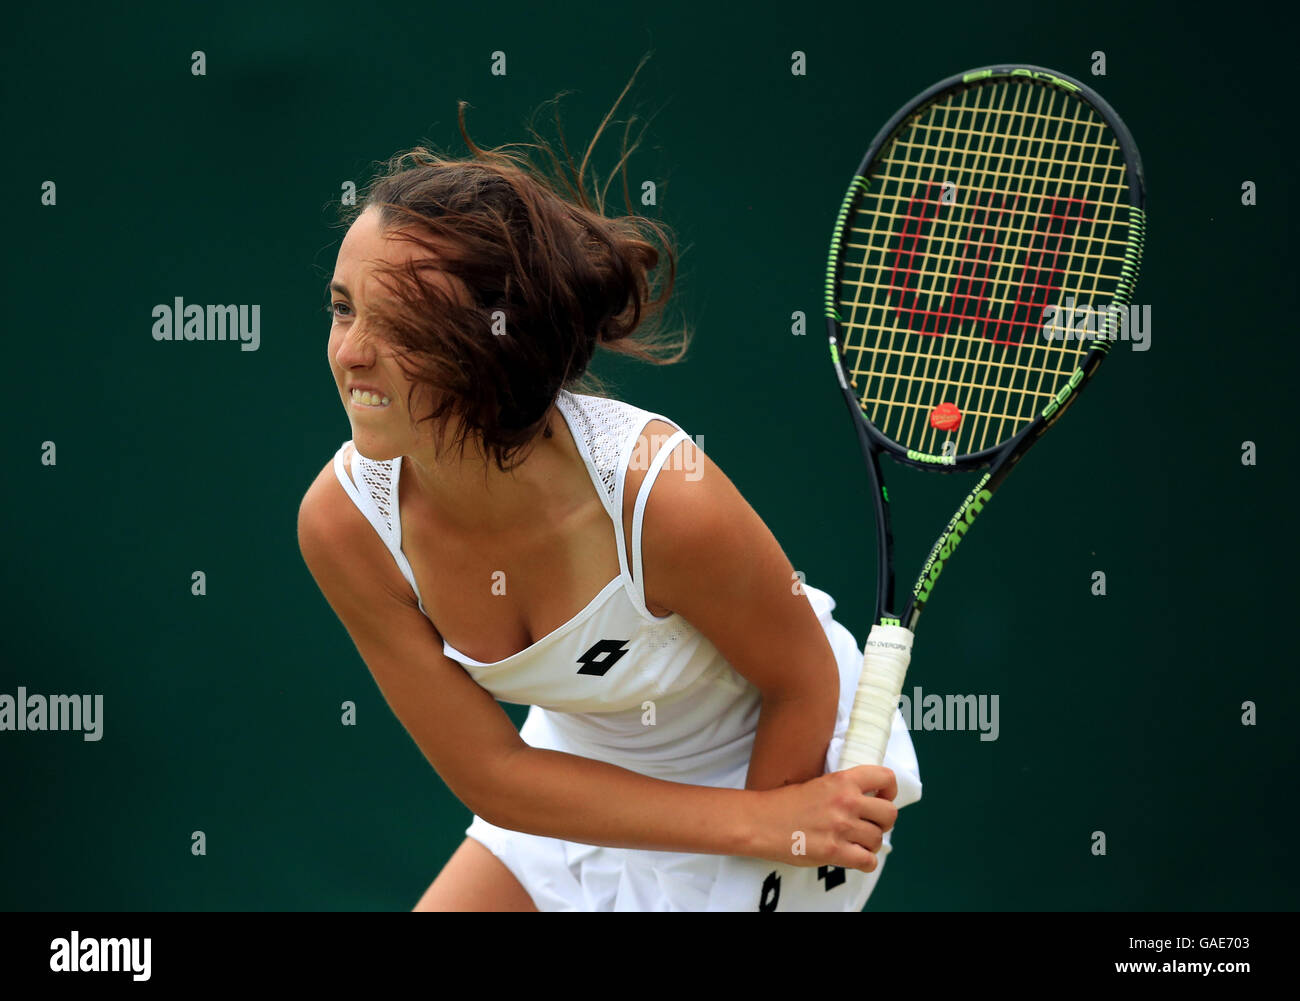 Tatiana Pieri in action in the girls singles on day seven of the Wimbledon  Championships at the All England Lawn Tennis and Croquet Club, Wimbledon.  PRESS ASSOCIATION Photo. Picture date: Monday July